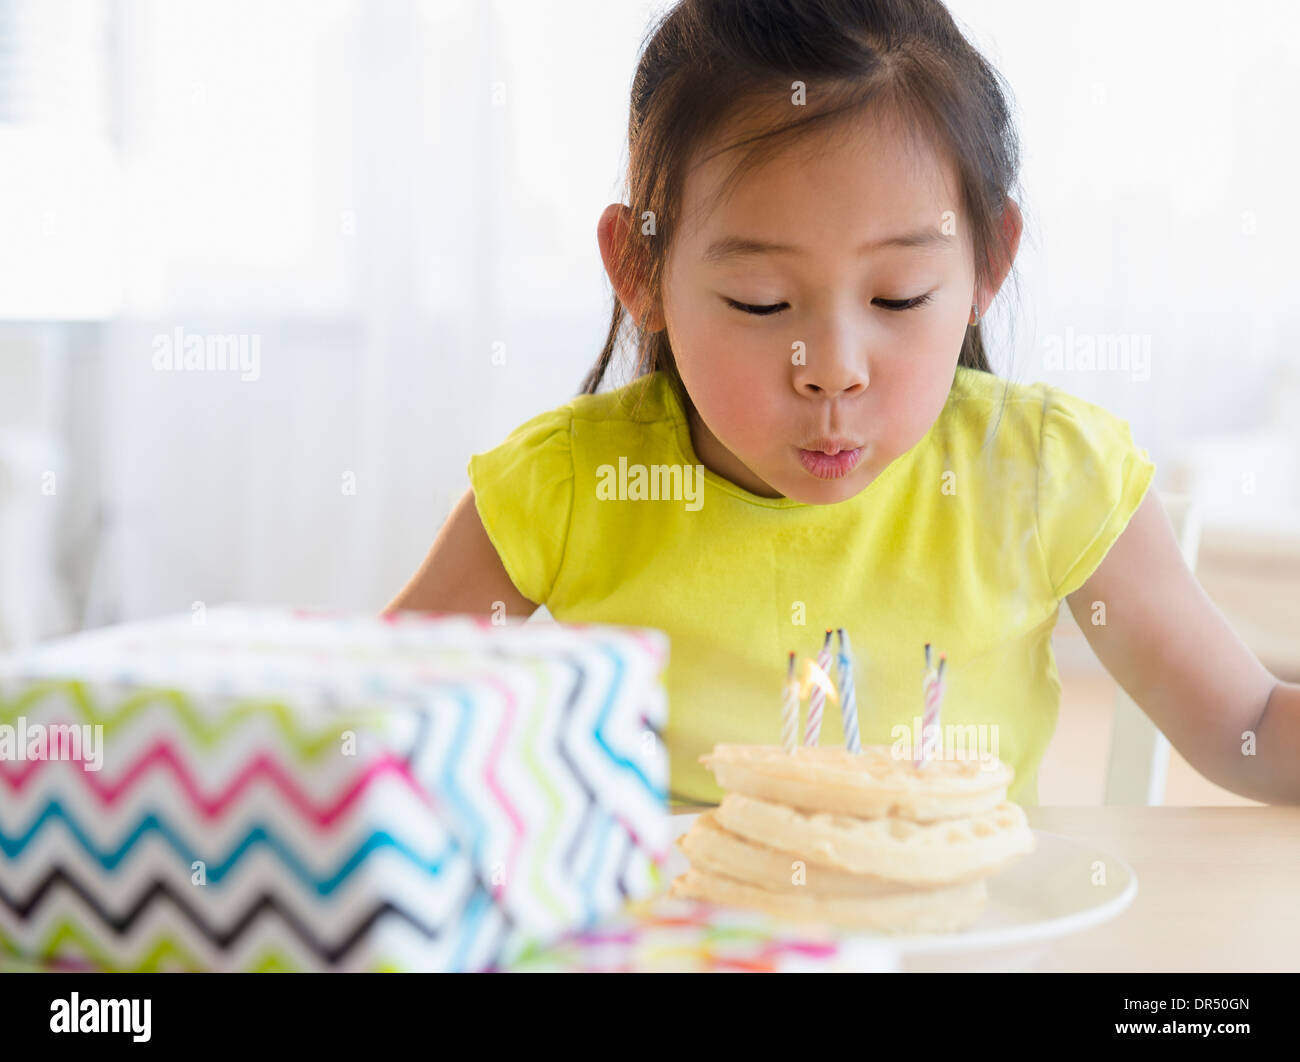 Korean girl blowing out candles on cake Banque D'Images